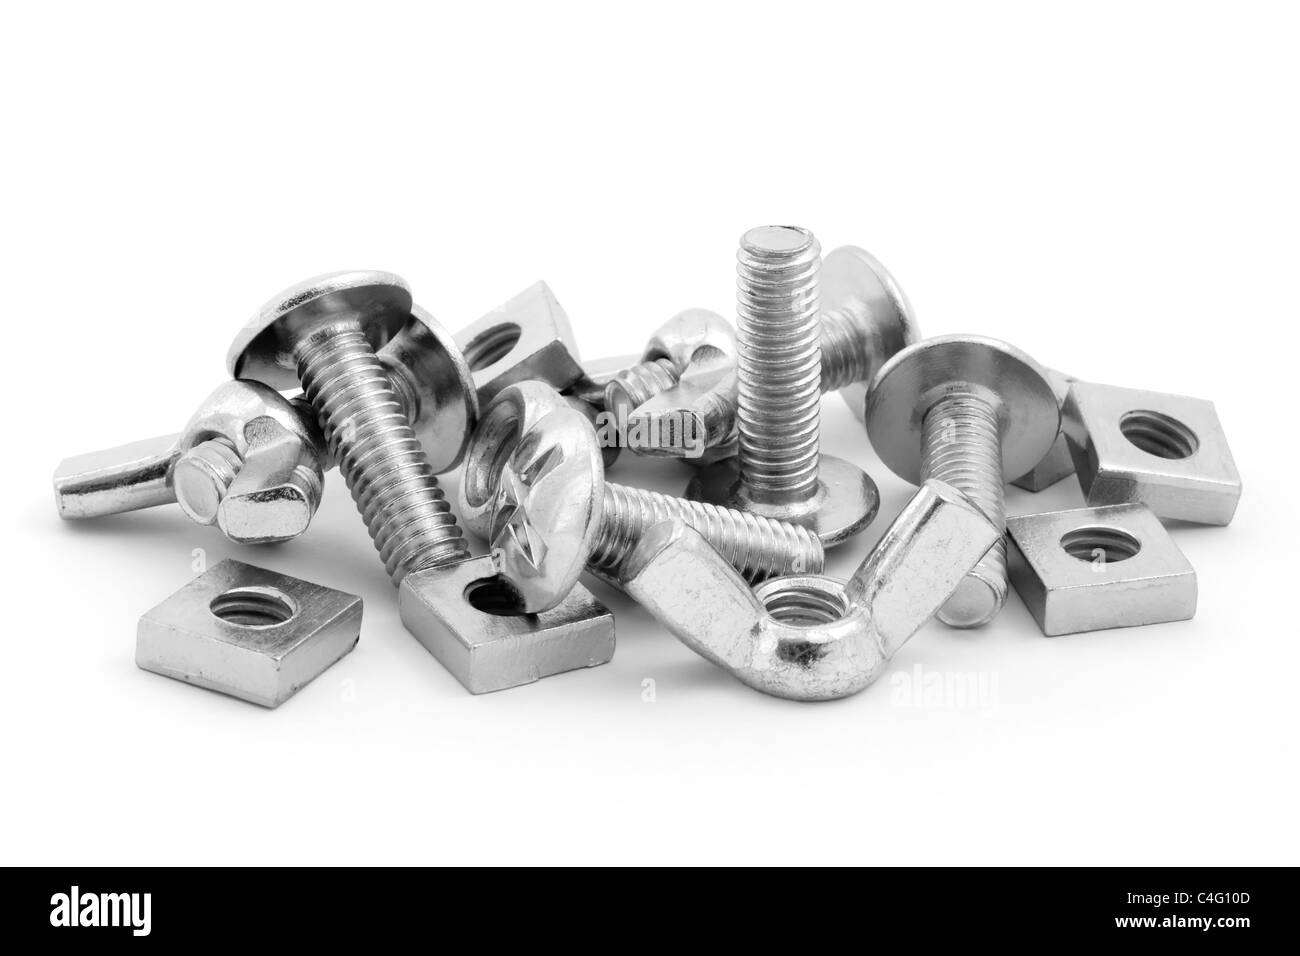 Pile of nuts and bolts isolated on a white background Stock Photo